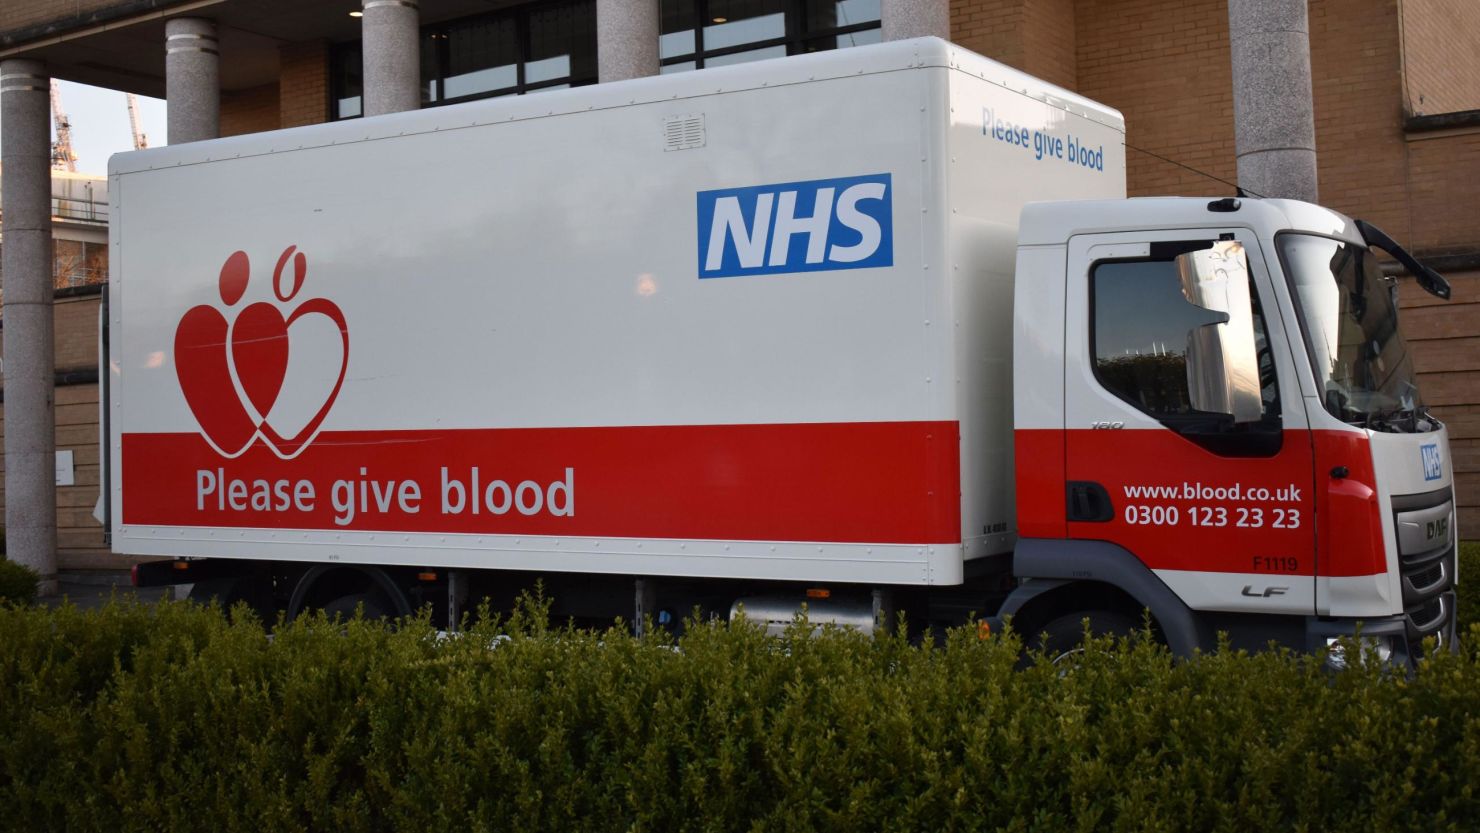 Ro blood - NHS Blood Donation